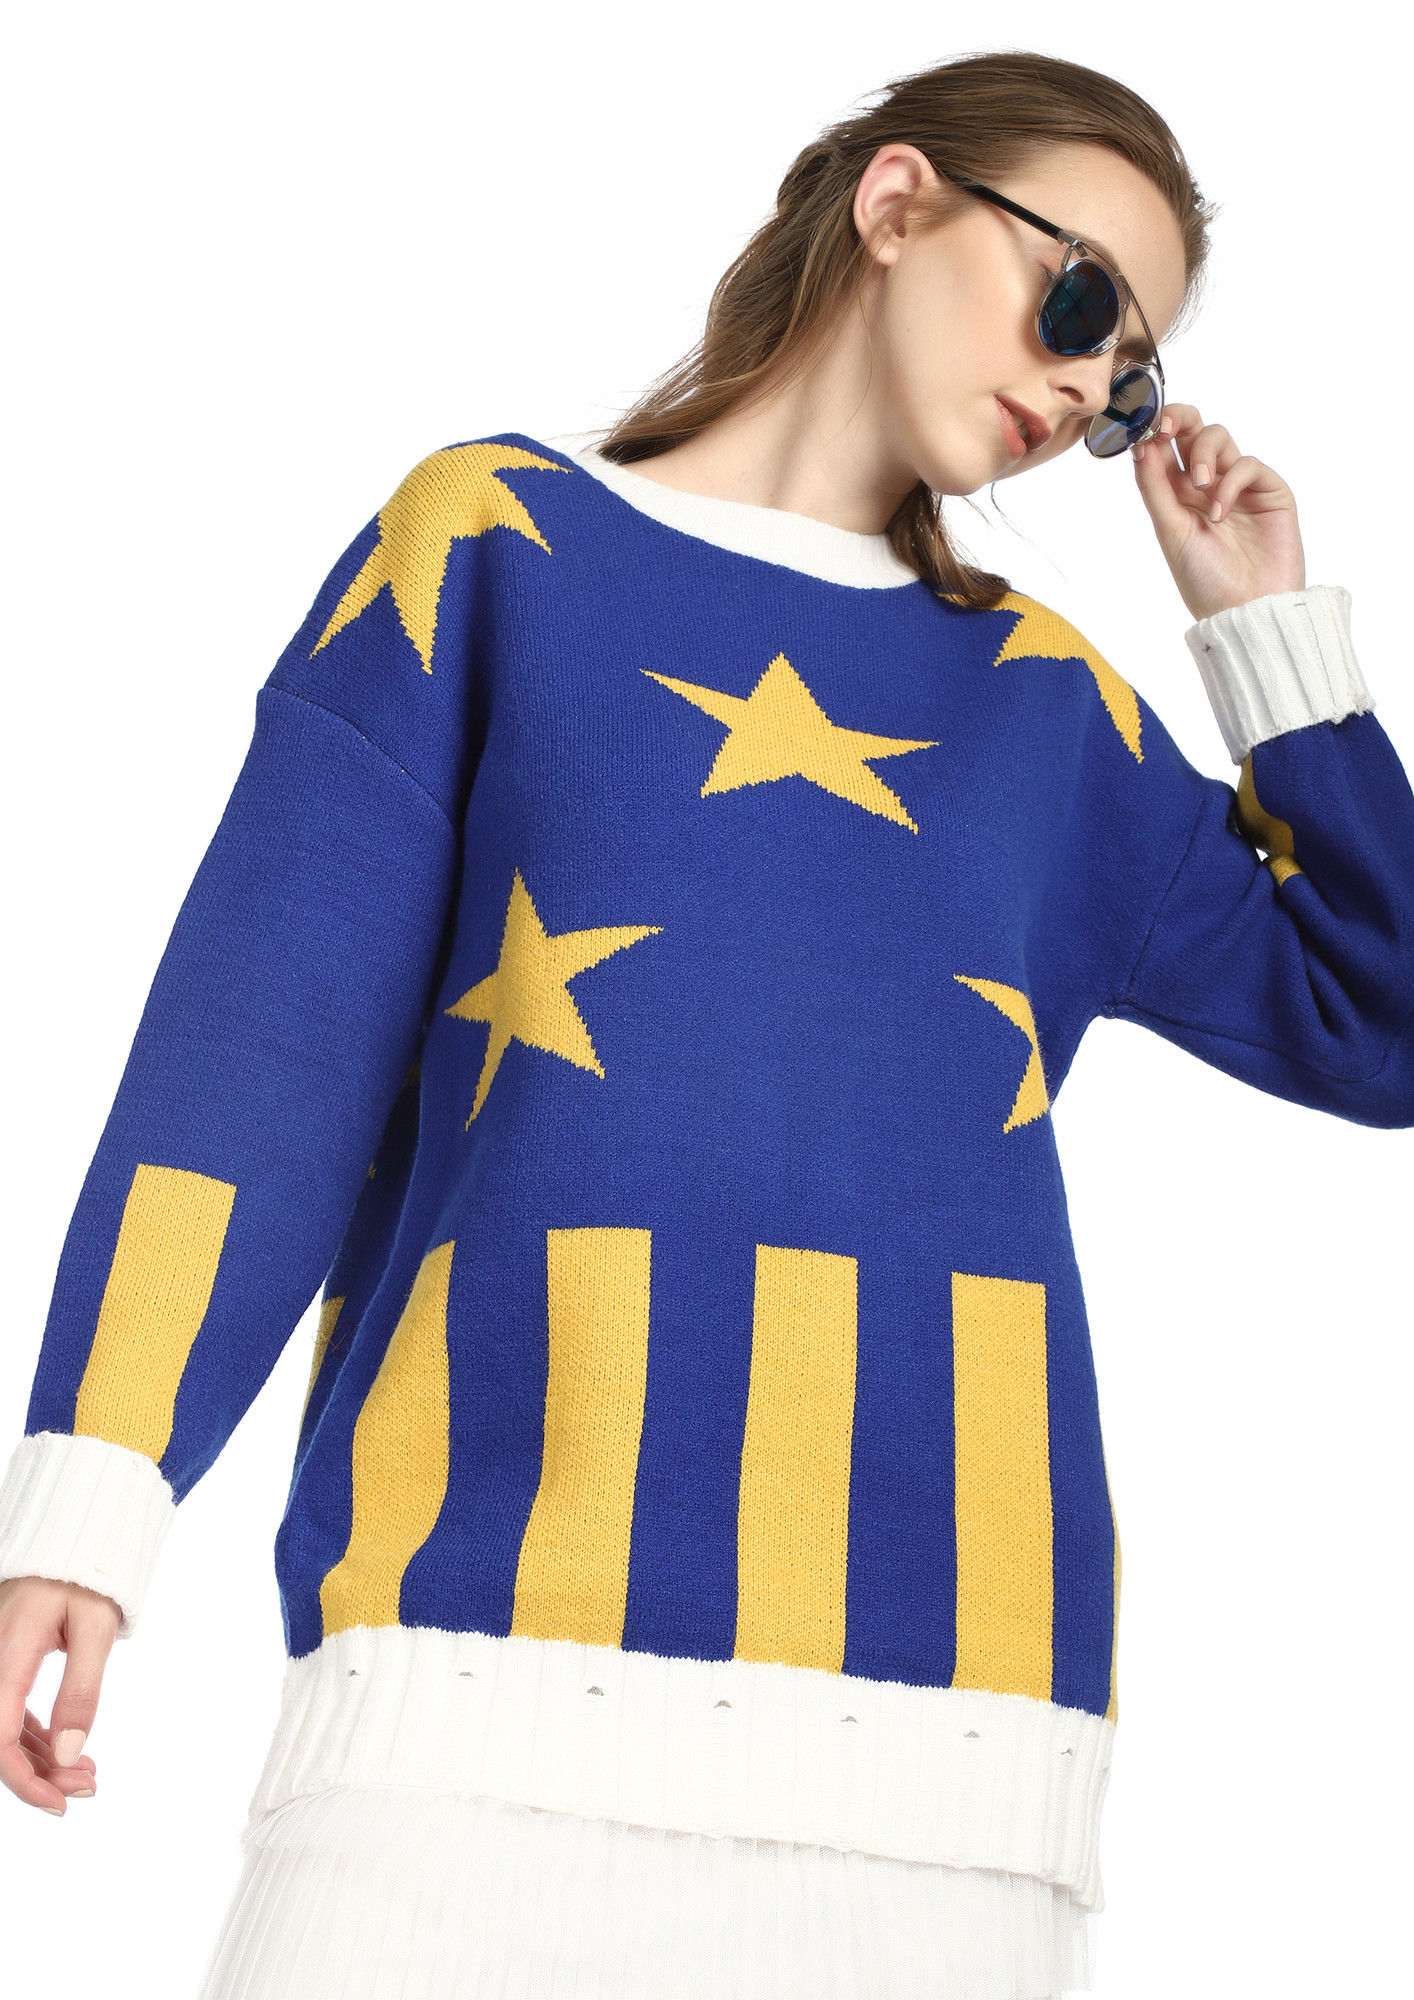 STAR BY ME BLUE JUMPER